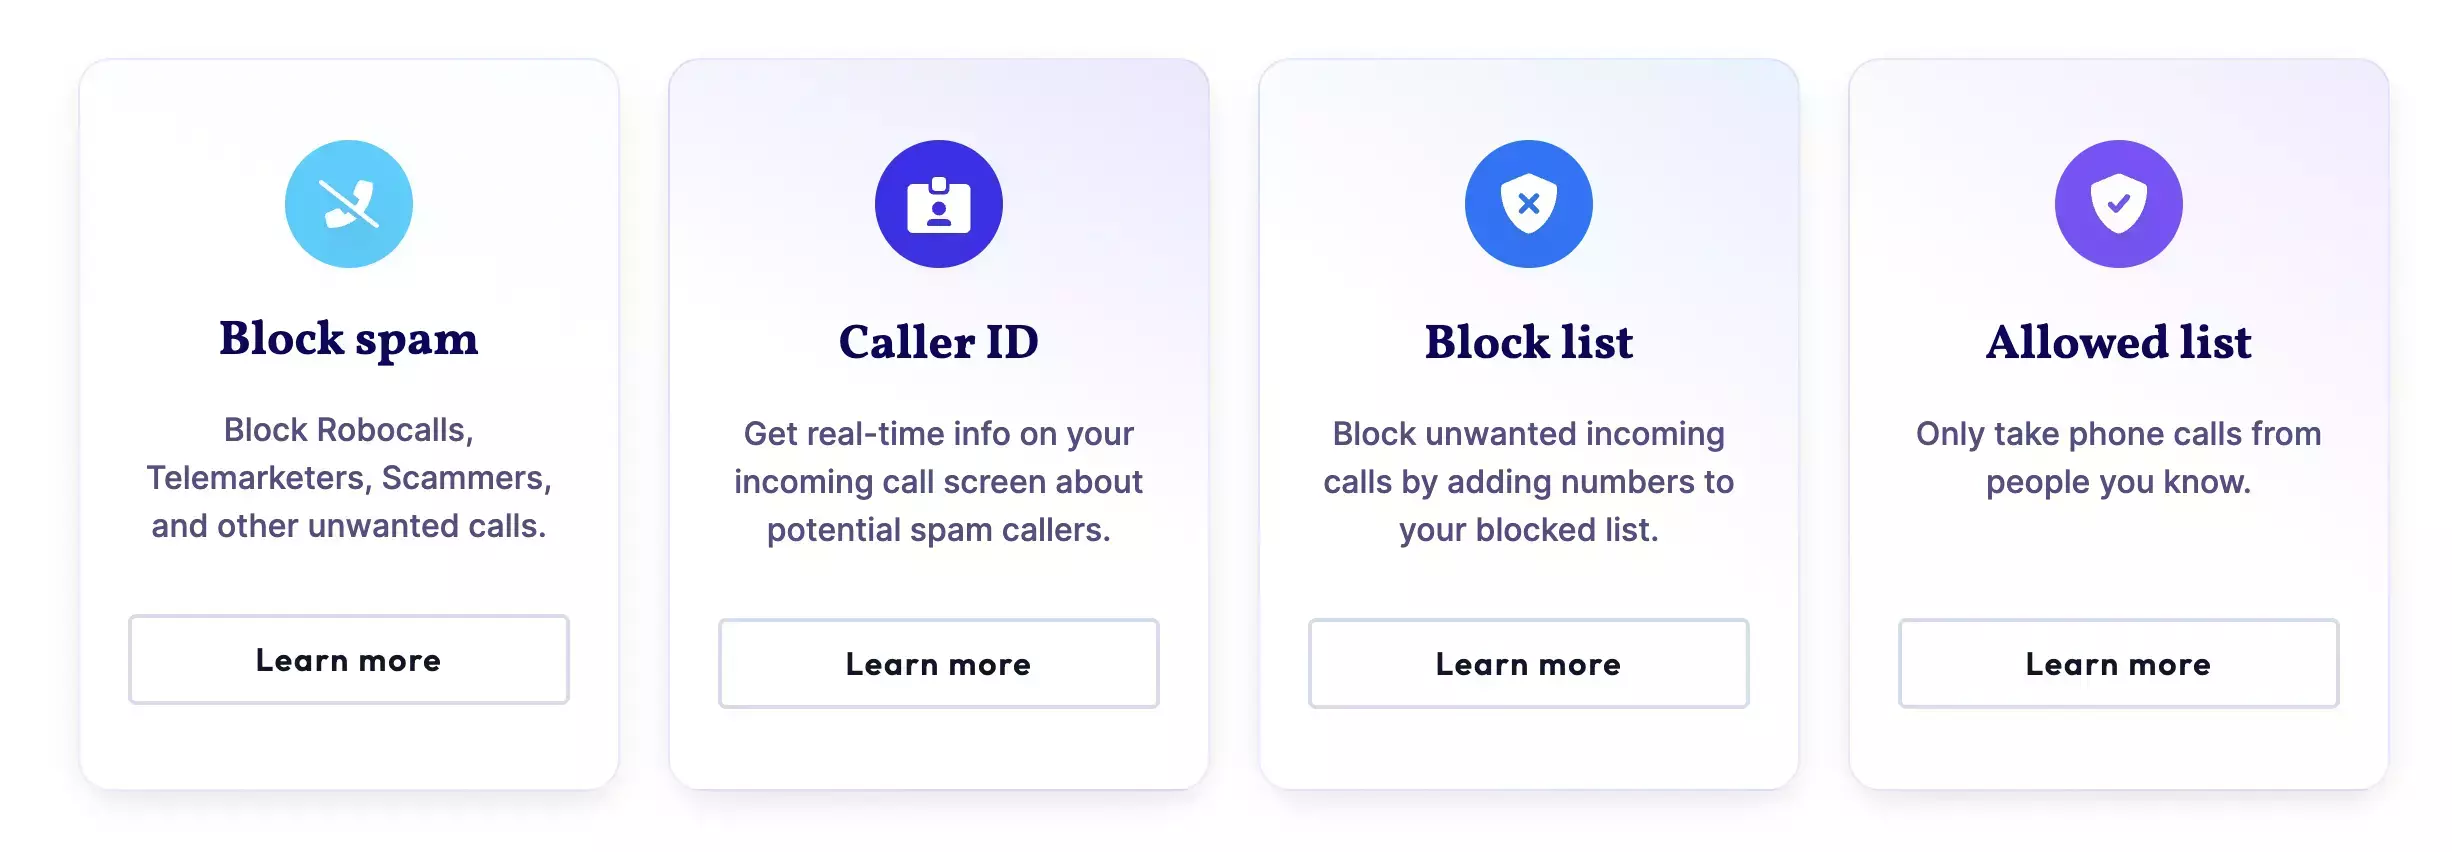 An image of Community Phone Spam call blocking features